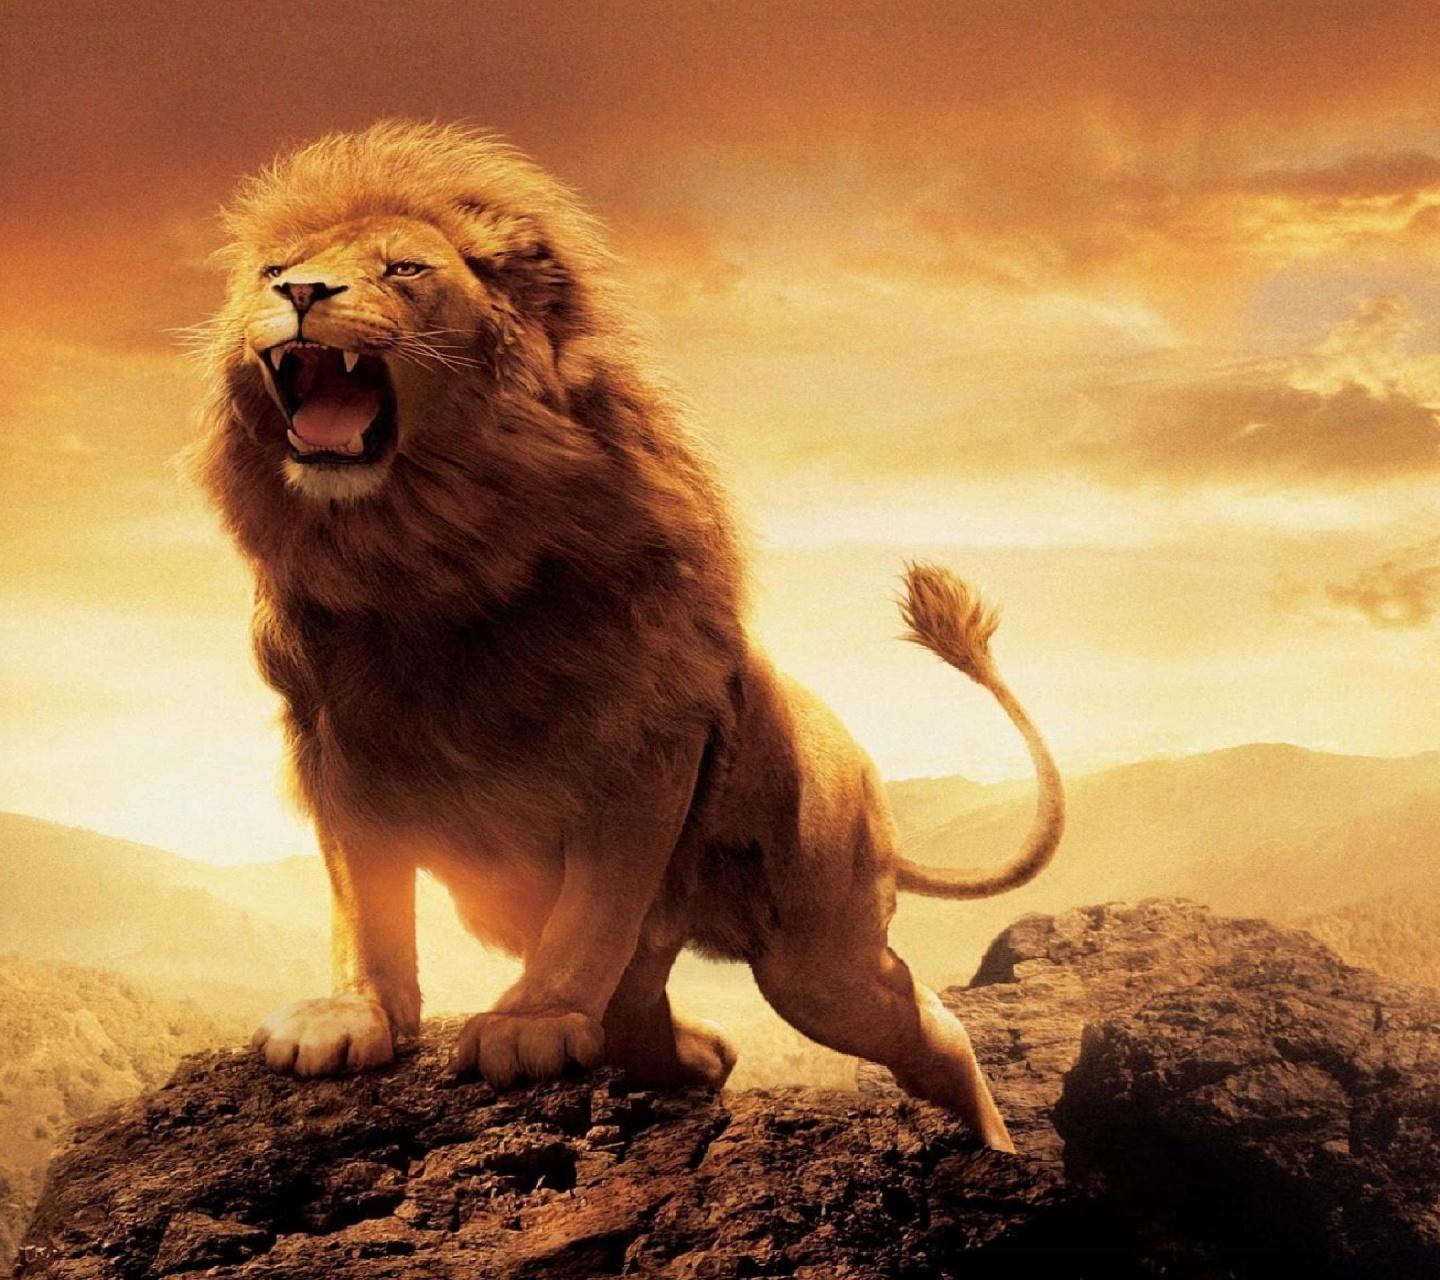 Lion Wallpaper For Android - APK Download